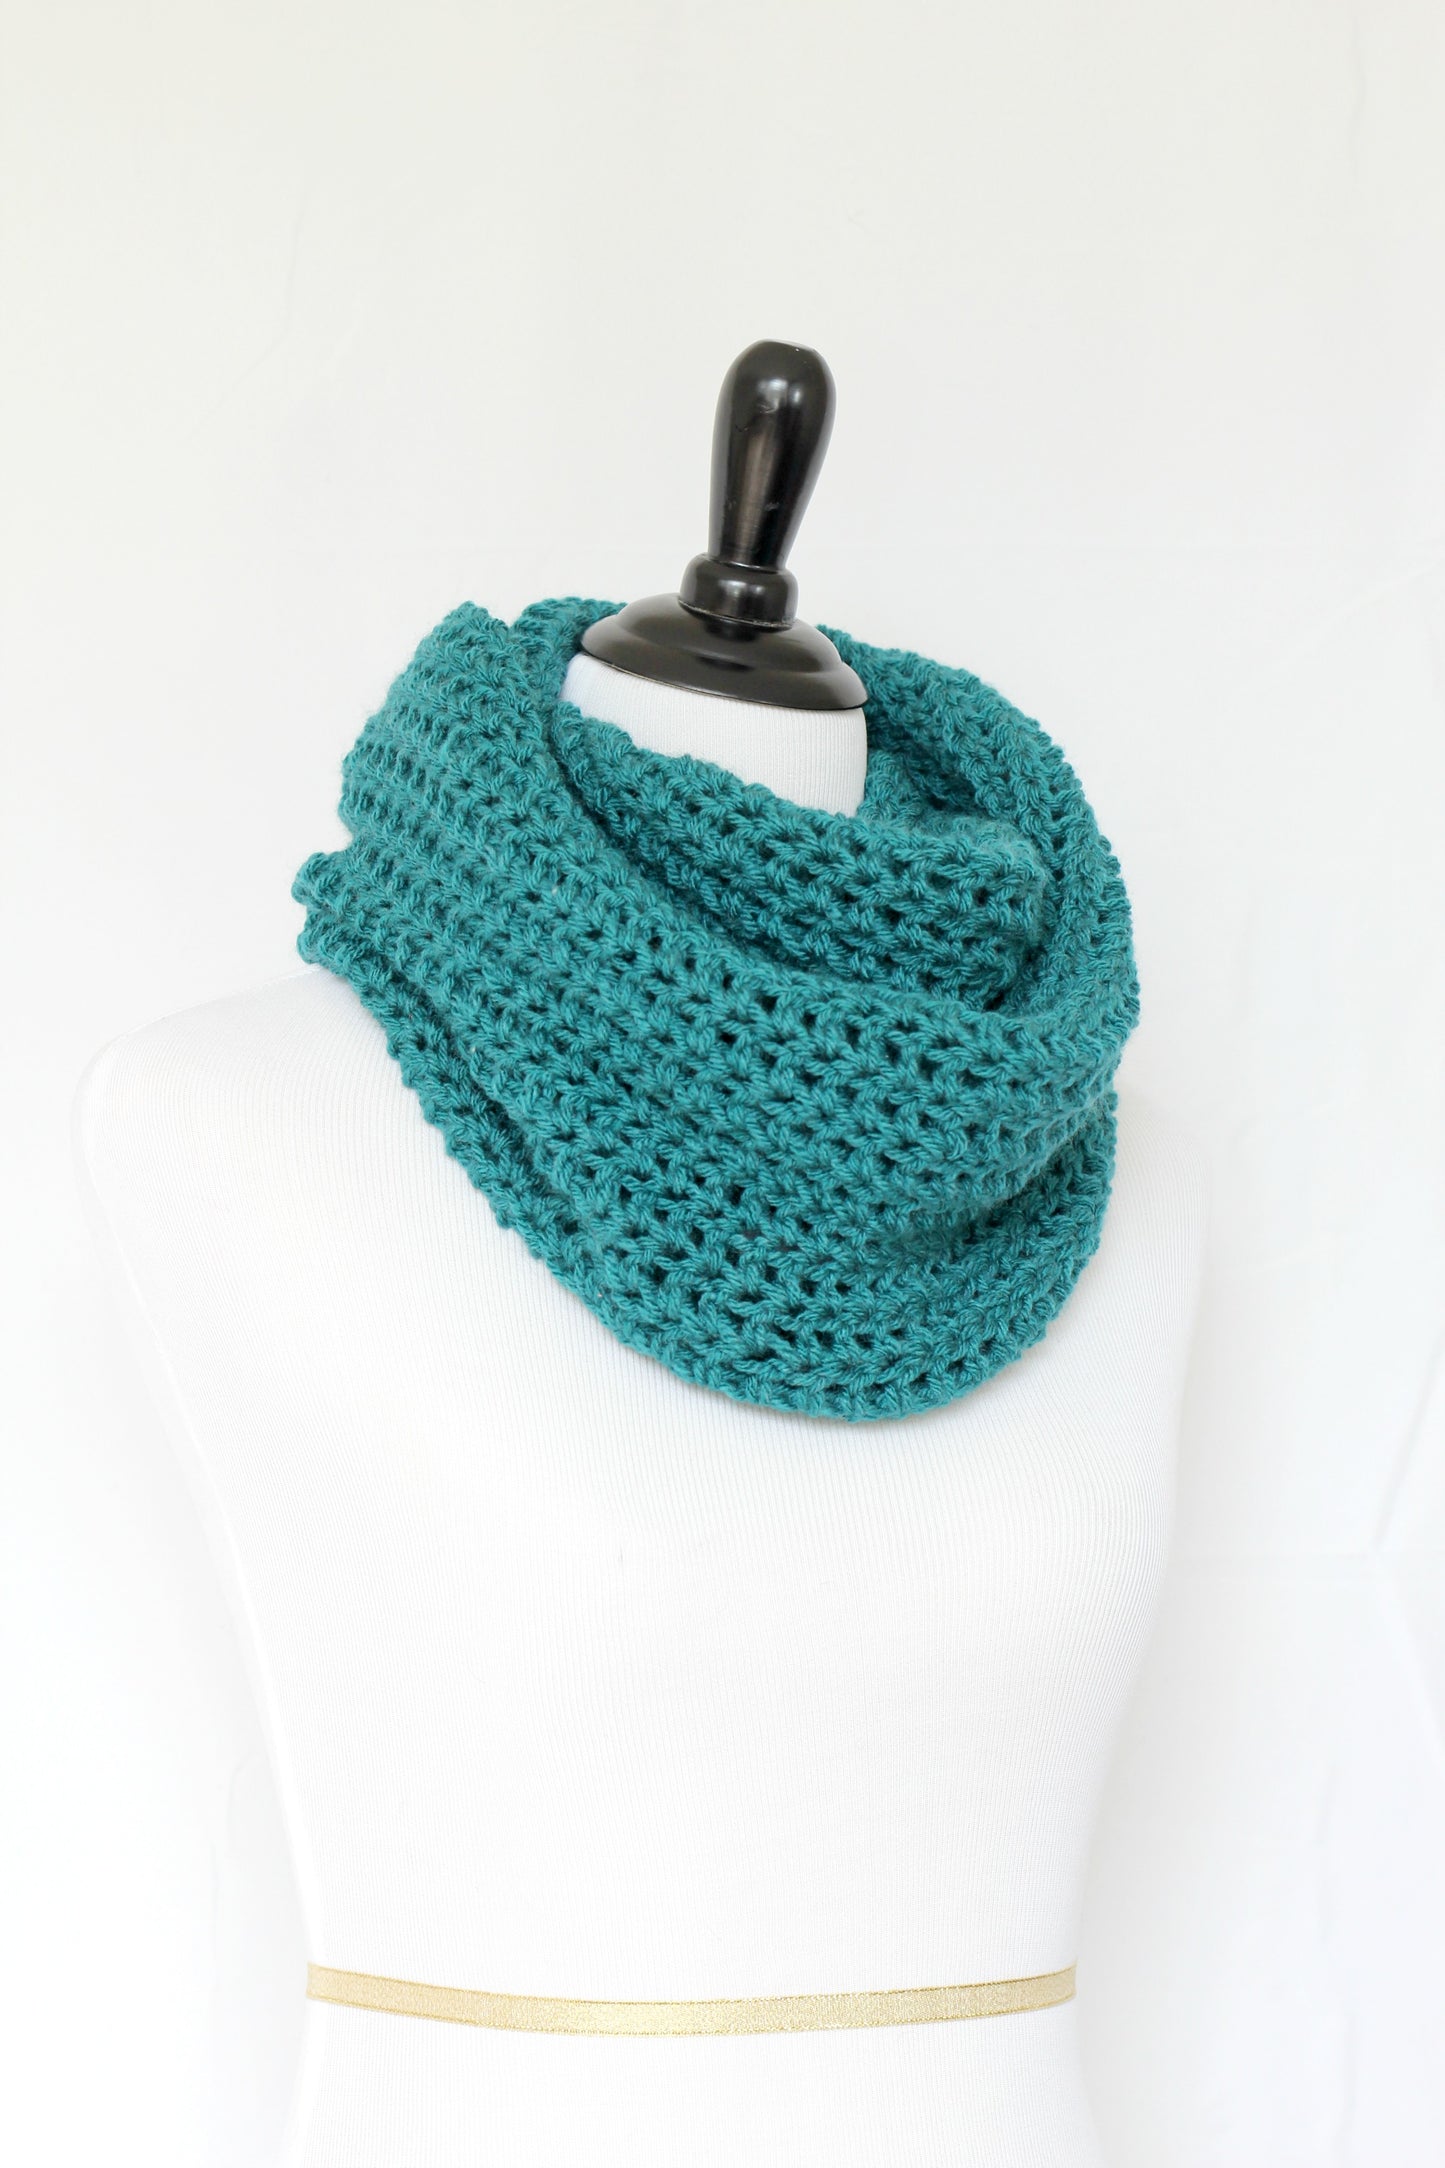 Crochet cowl in teal color, chunky infinity scarf - 12 colors available